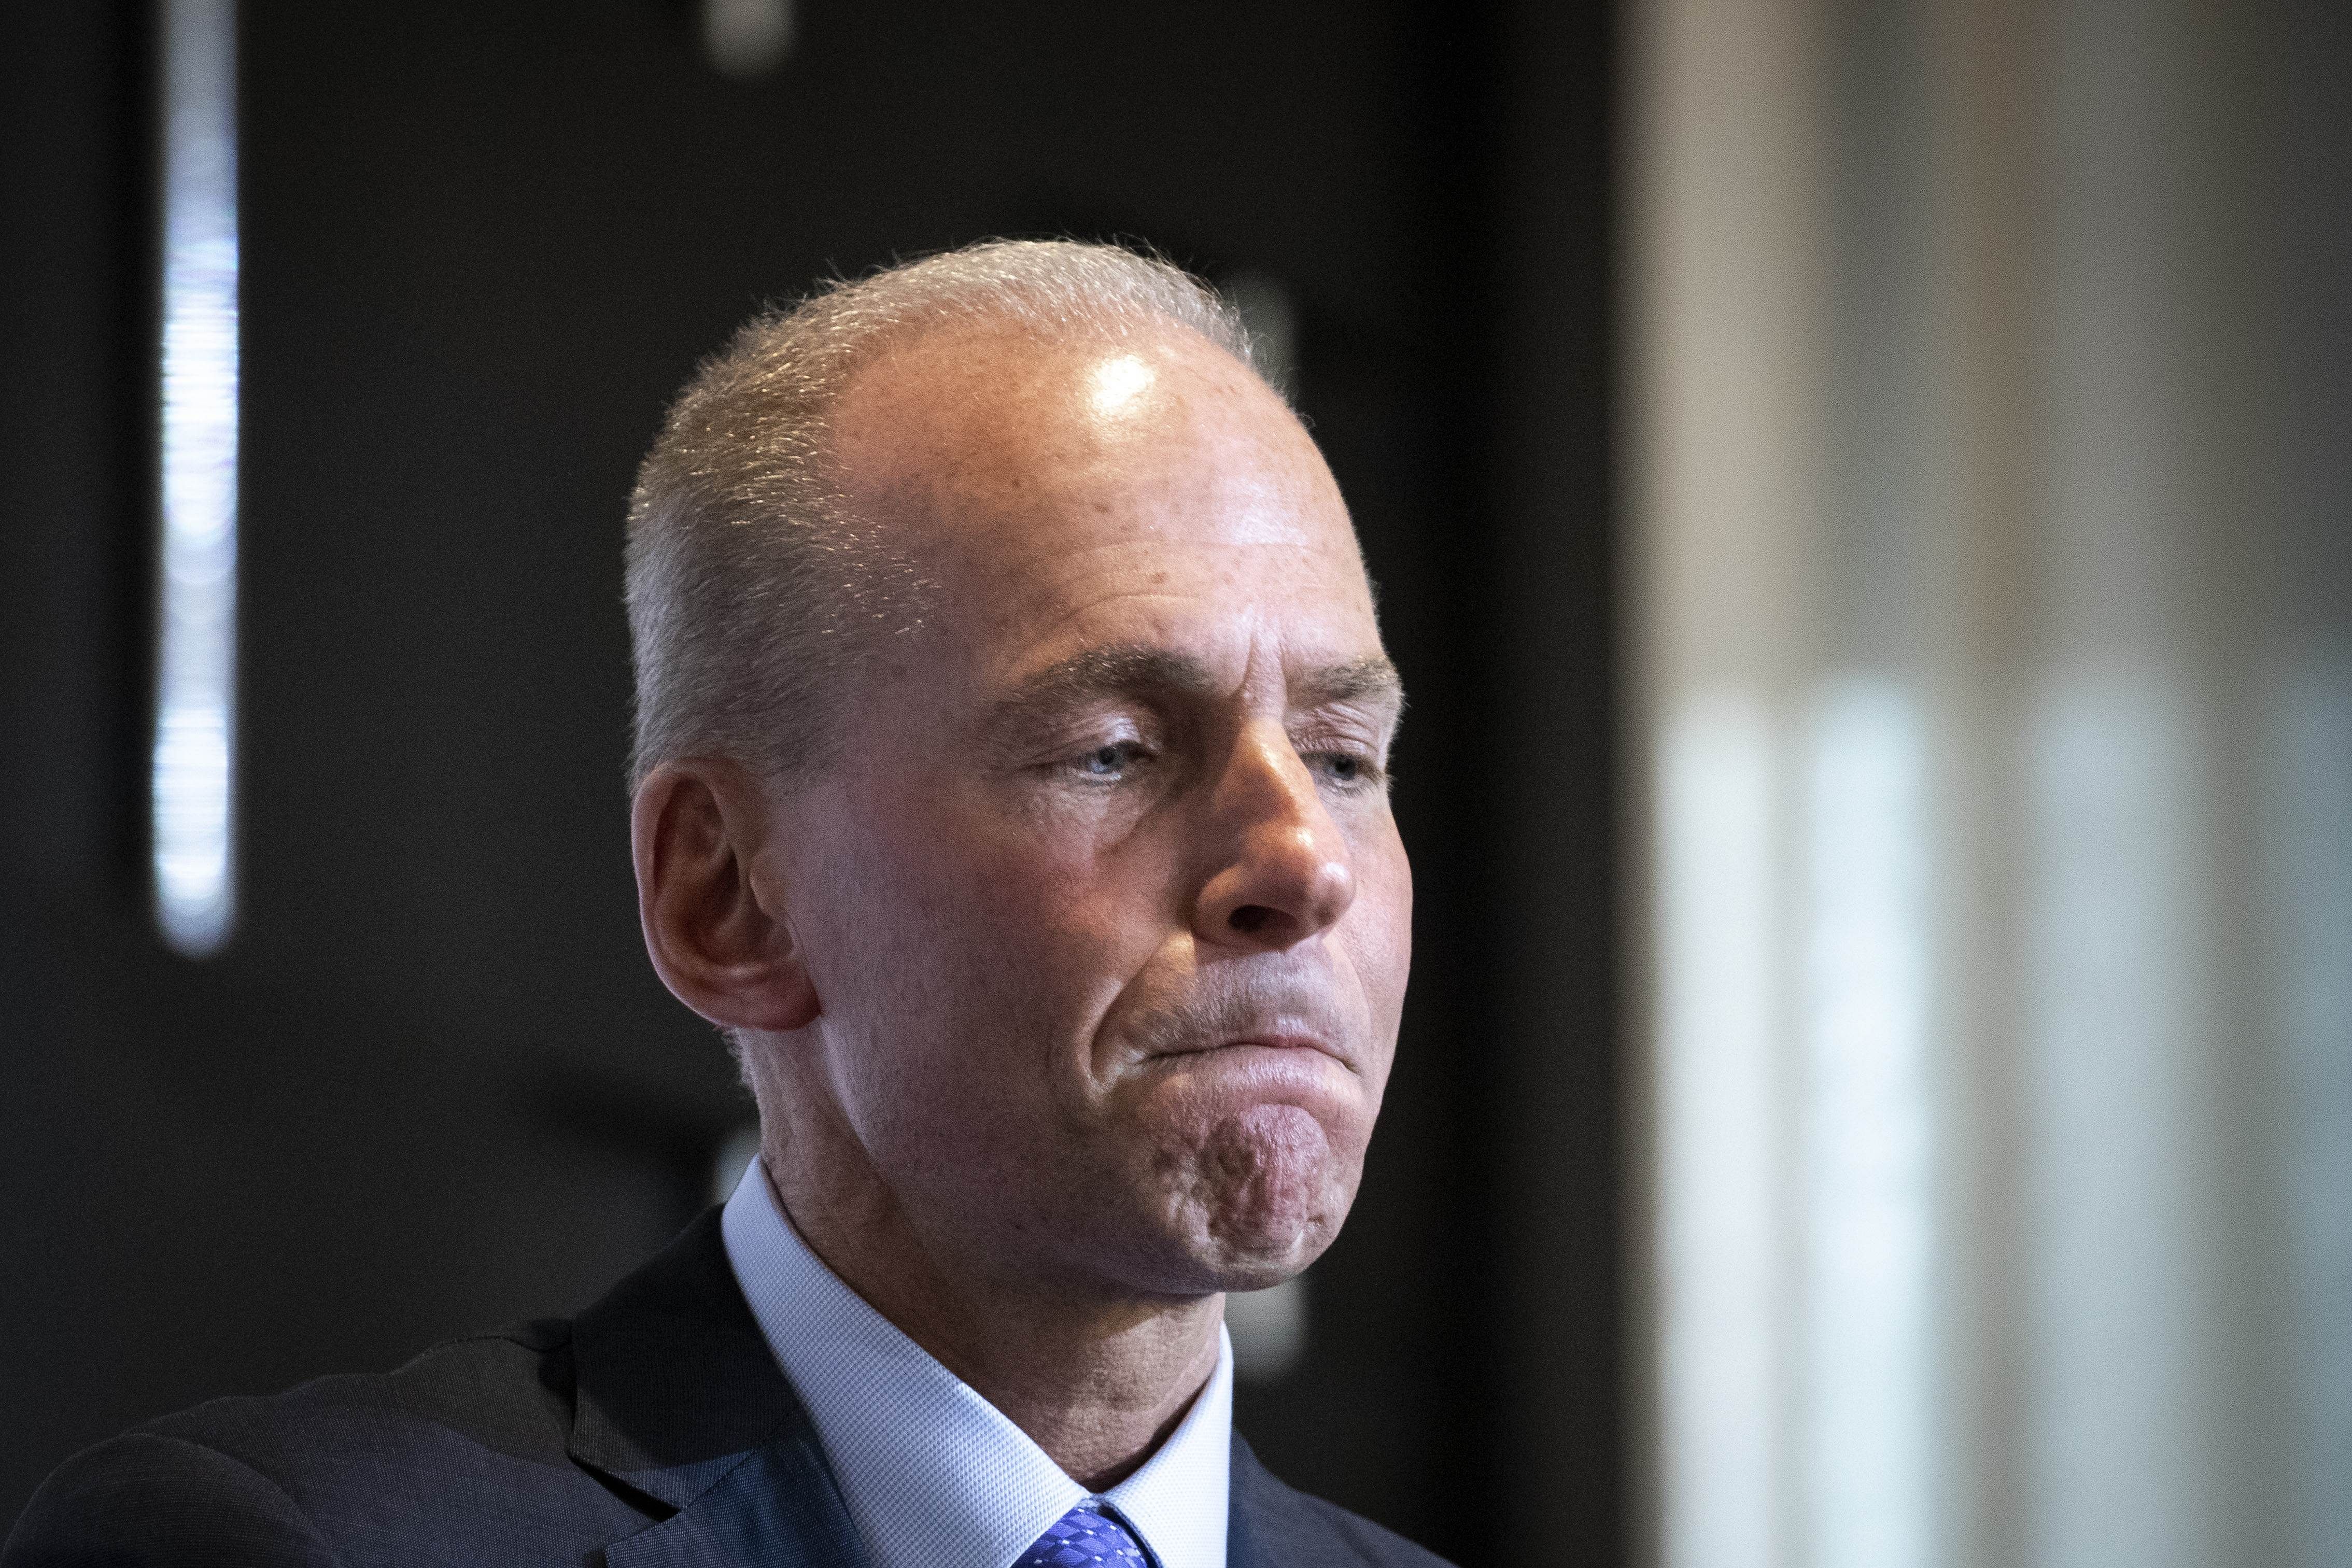 Boeing CEO Dennis Muilenburg speaks at an Economic Club Of New York event. (AFP Photo)